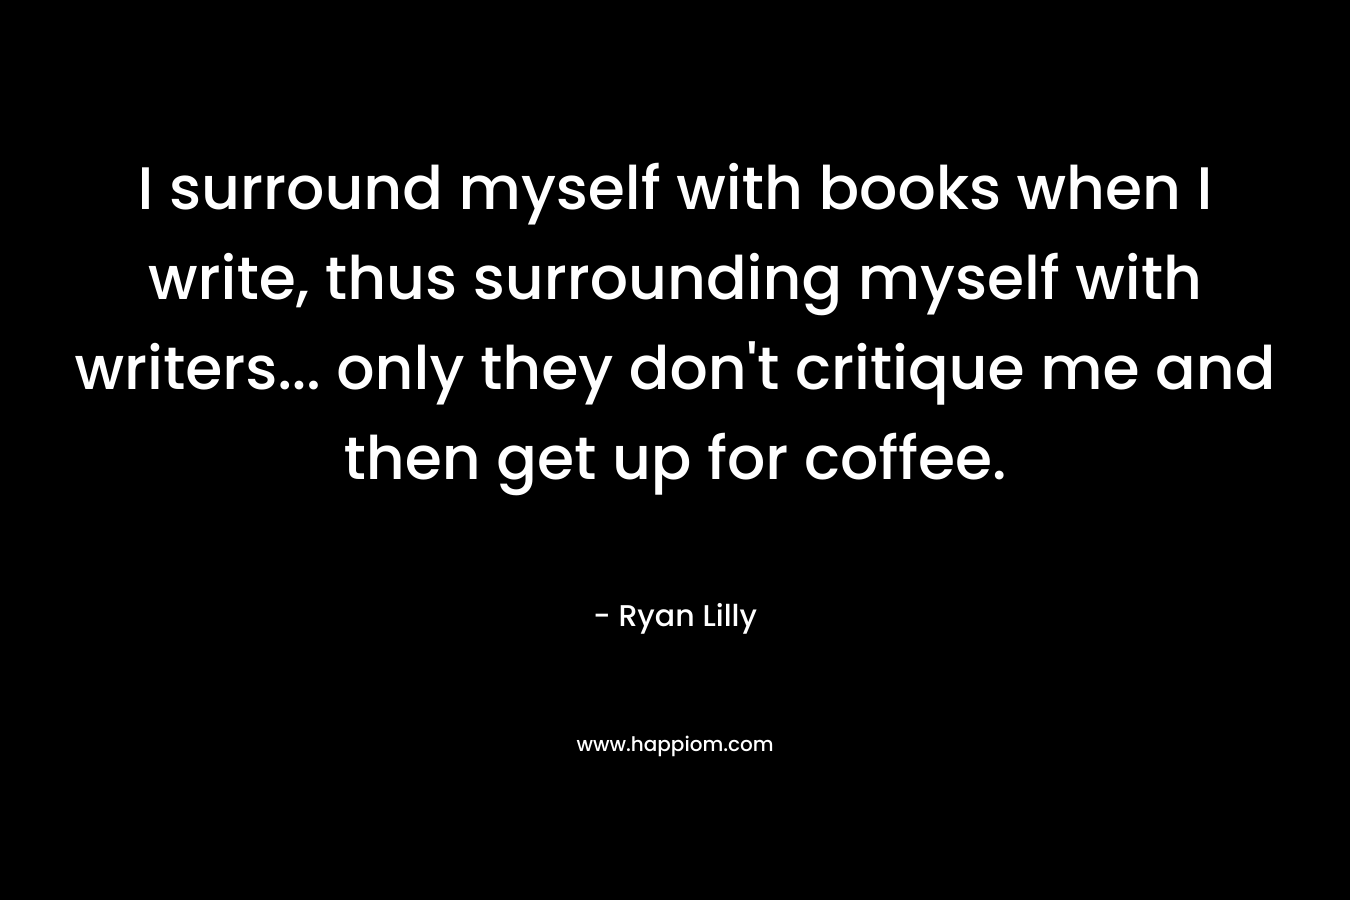 I surround myself with books when I write, thus surrounding myself with writers... only they don't critique me and then get up for coffee.